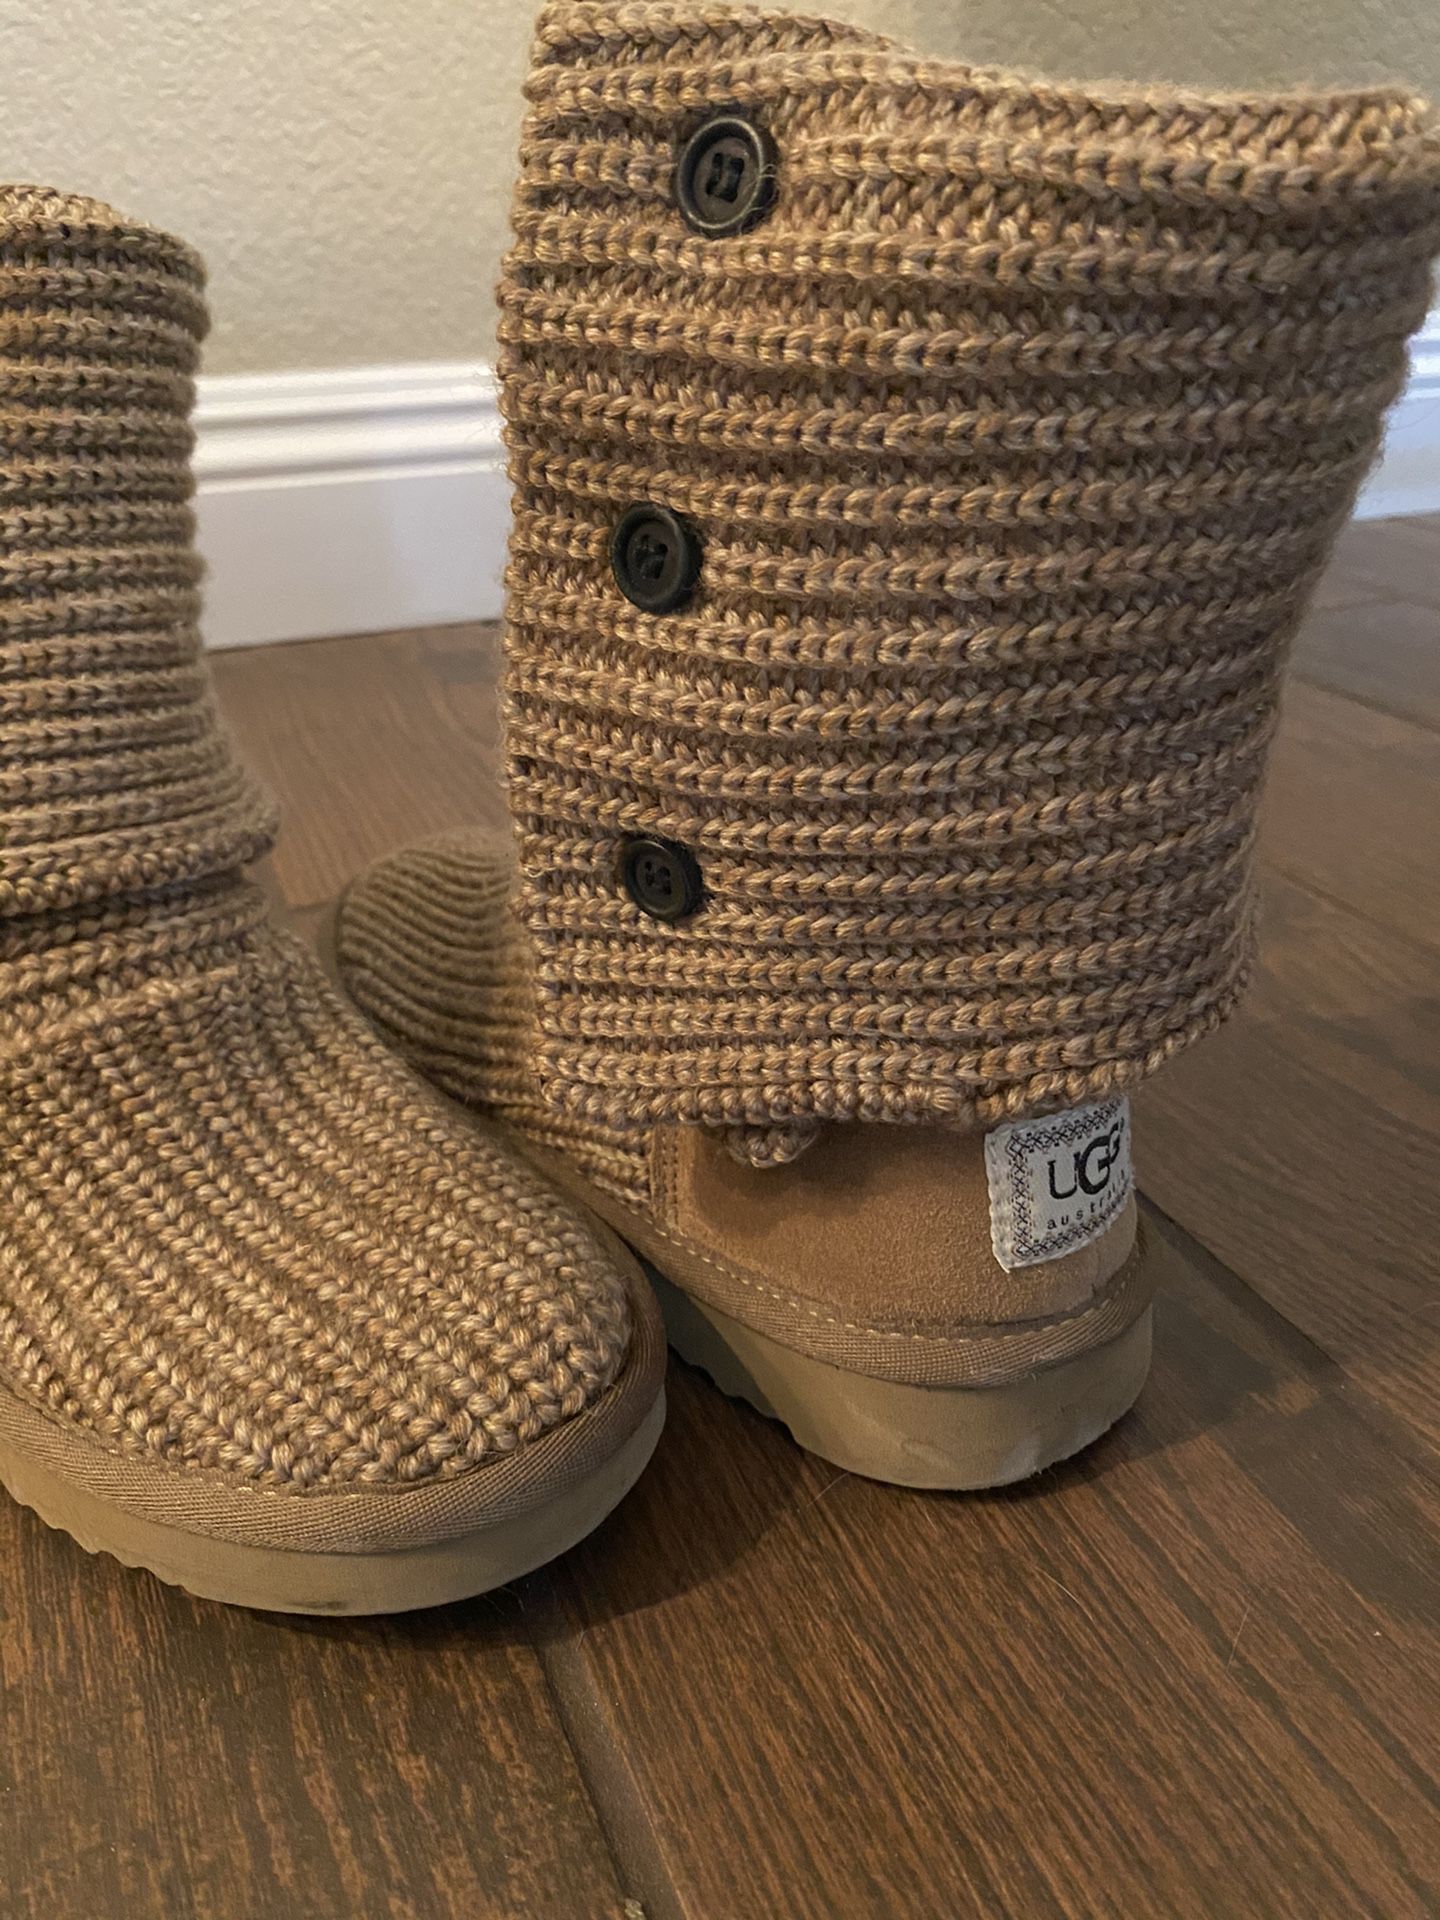 UGG Classic Cardy Knit Boot Size 7